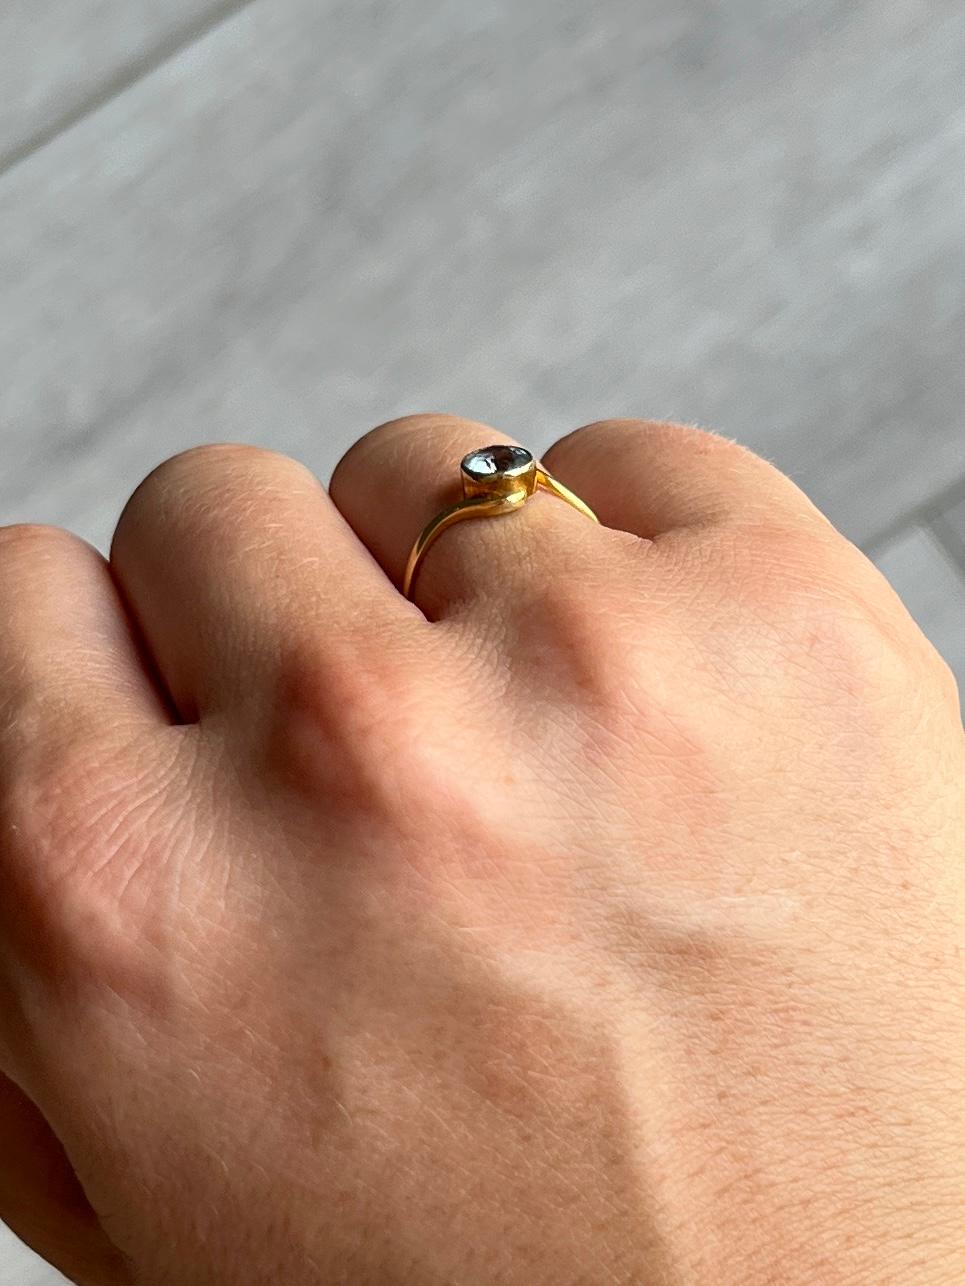 This stunning aqua is pale in colour. The setting is decorative and the ring is modelled in 18carat gold. The stone measures approx 50pts. 

Ring Size: J 1/2 or 5 
Height Off Finger: 4mm
Stone Diameter: 5.5mm 

Weight: 1g